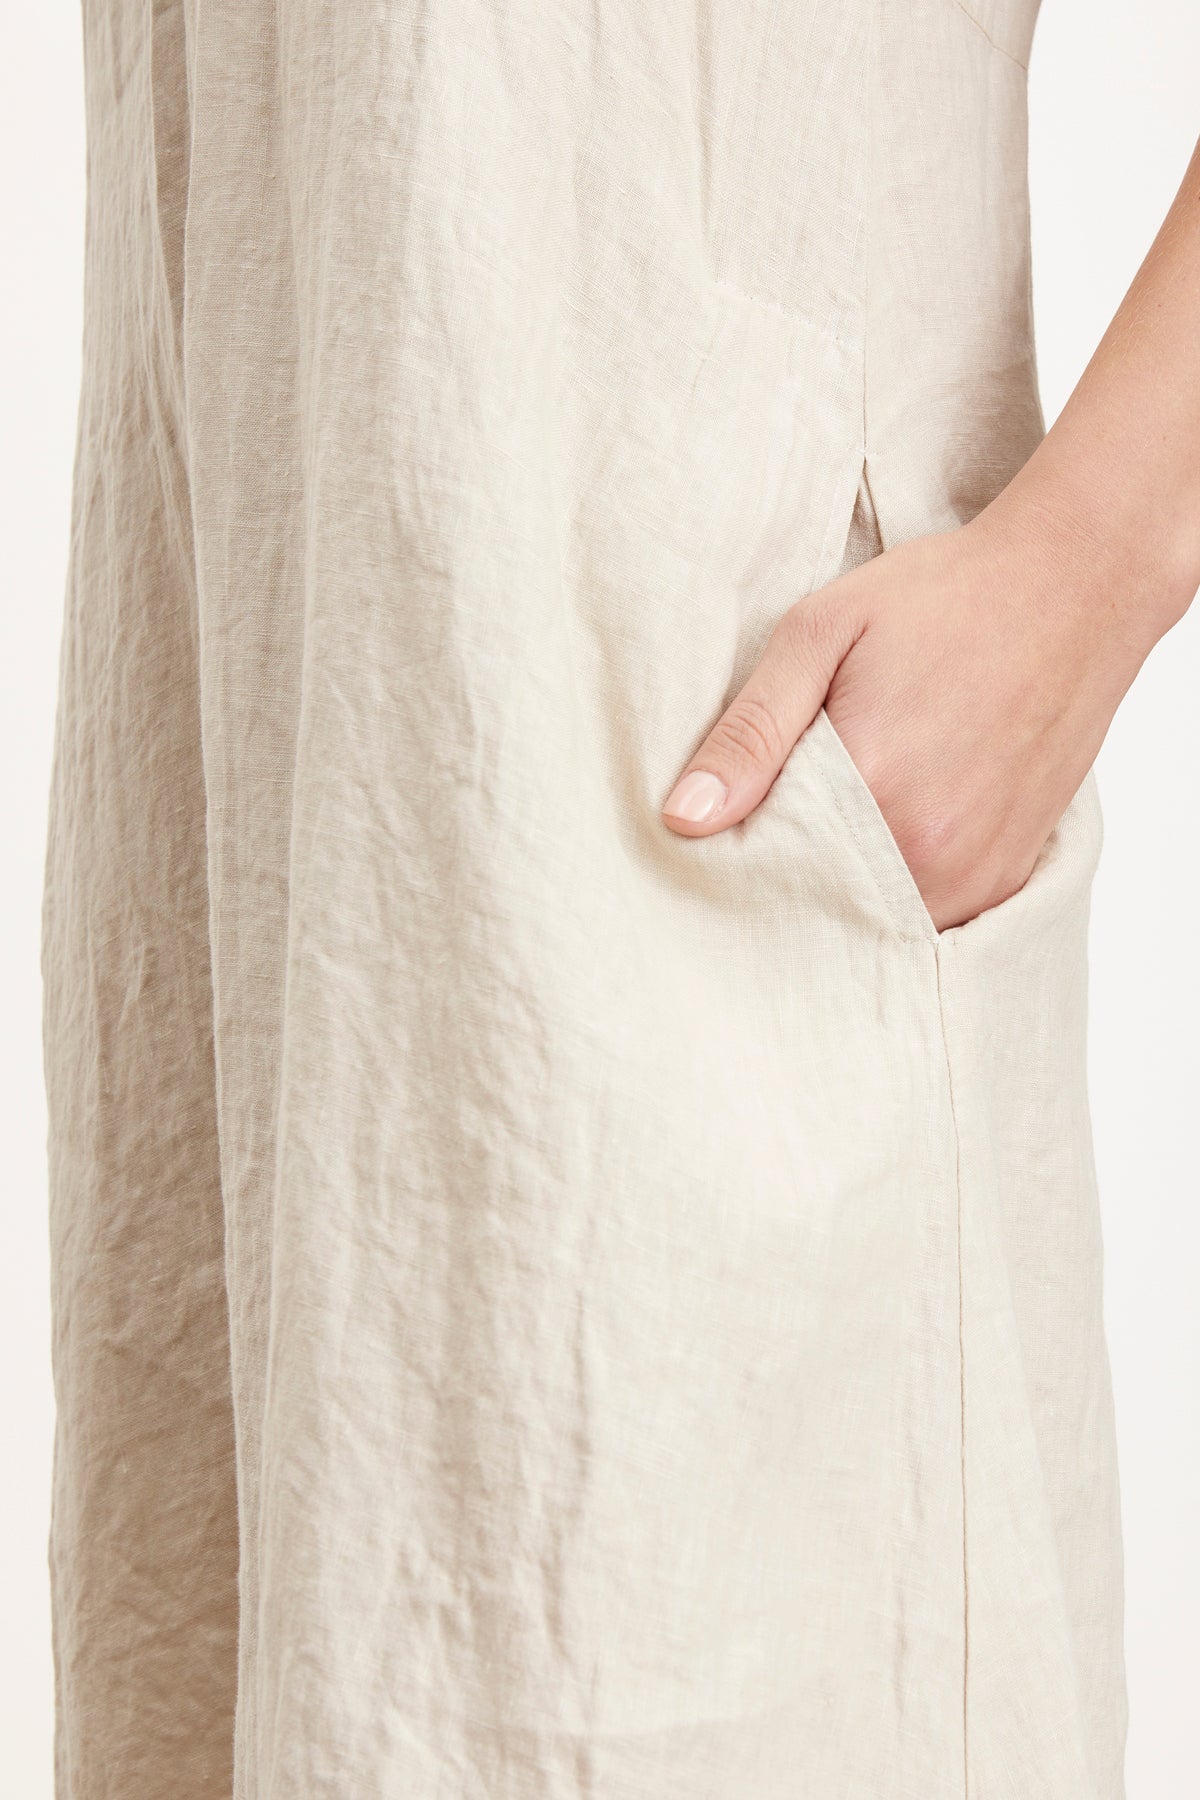   Detail of Winley Dress in sand colored linen with woman's hand in pocket 